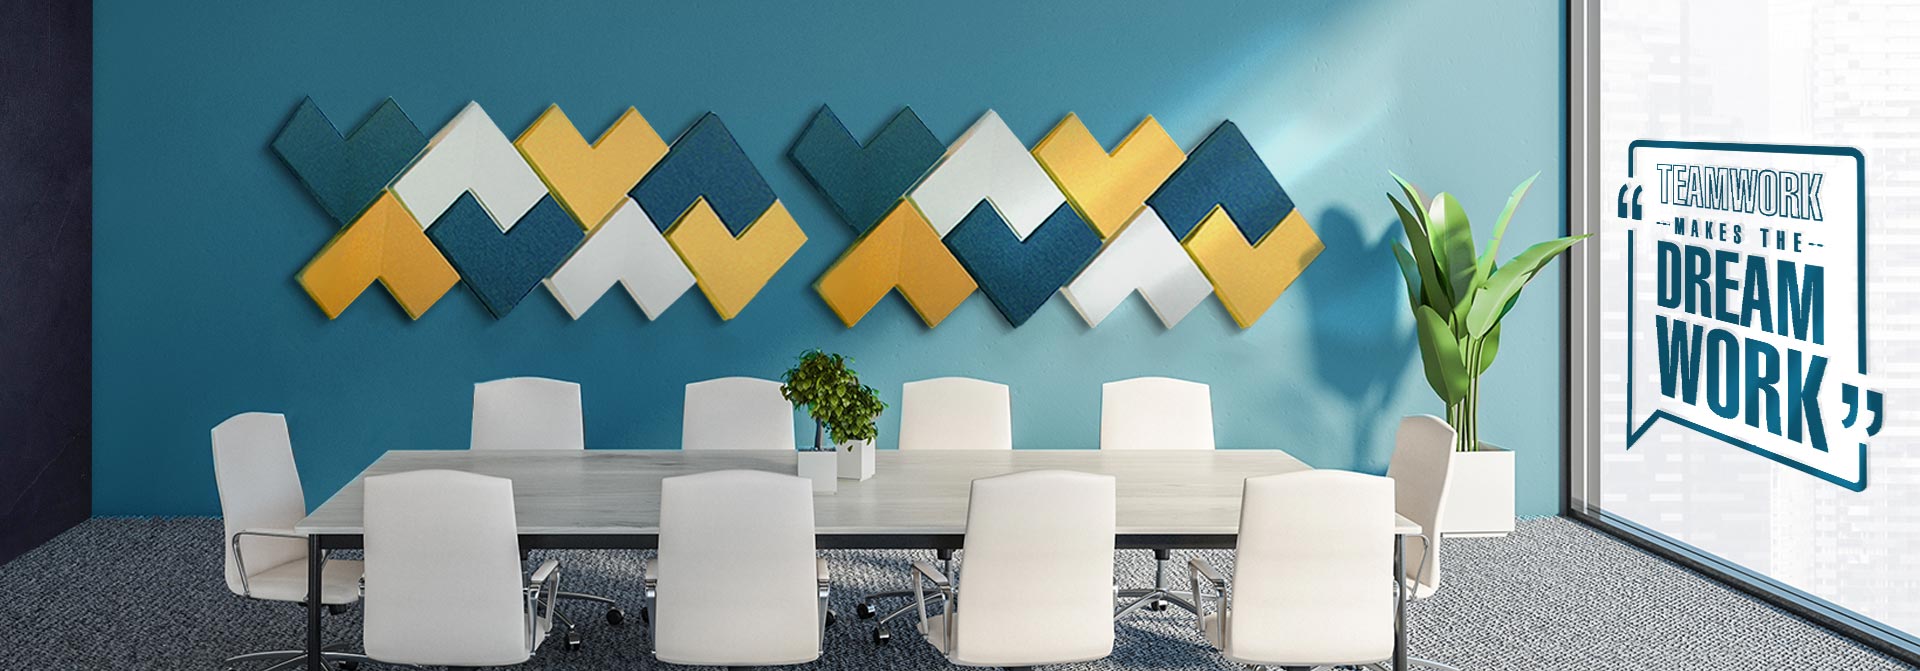 Modern Conference Room Design Ideas for Stimulating Meetings | Blog